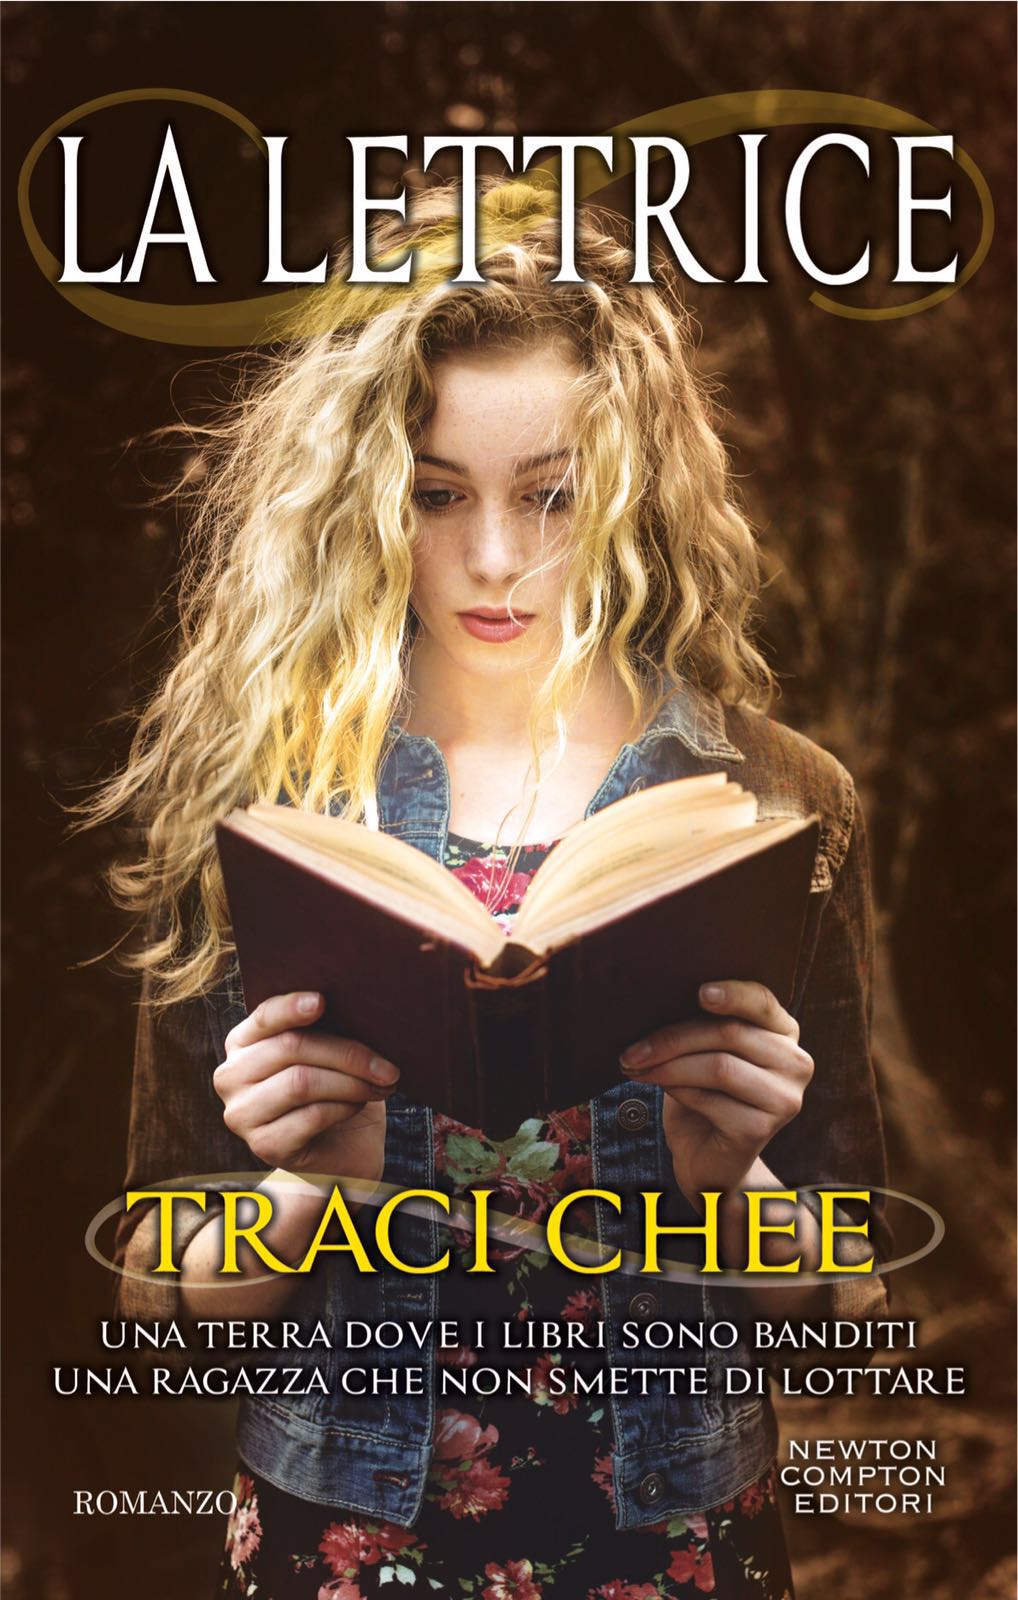 cover of the Italian edition of THE READER by Traci Chee, LA LETTRICE